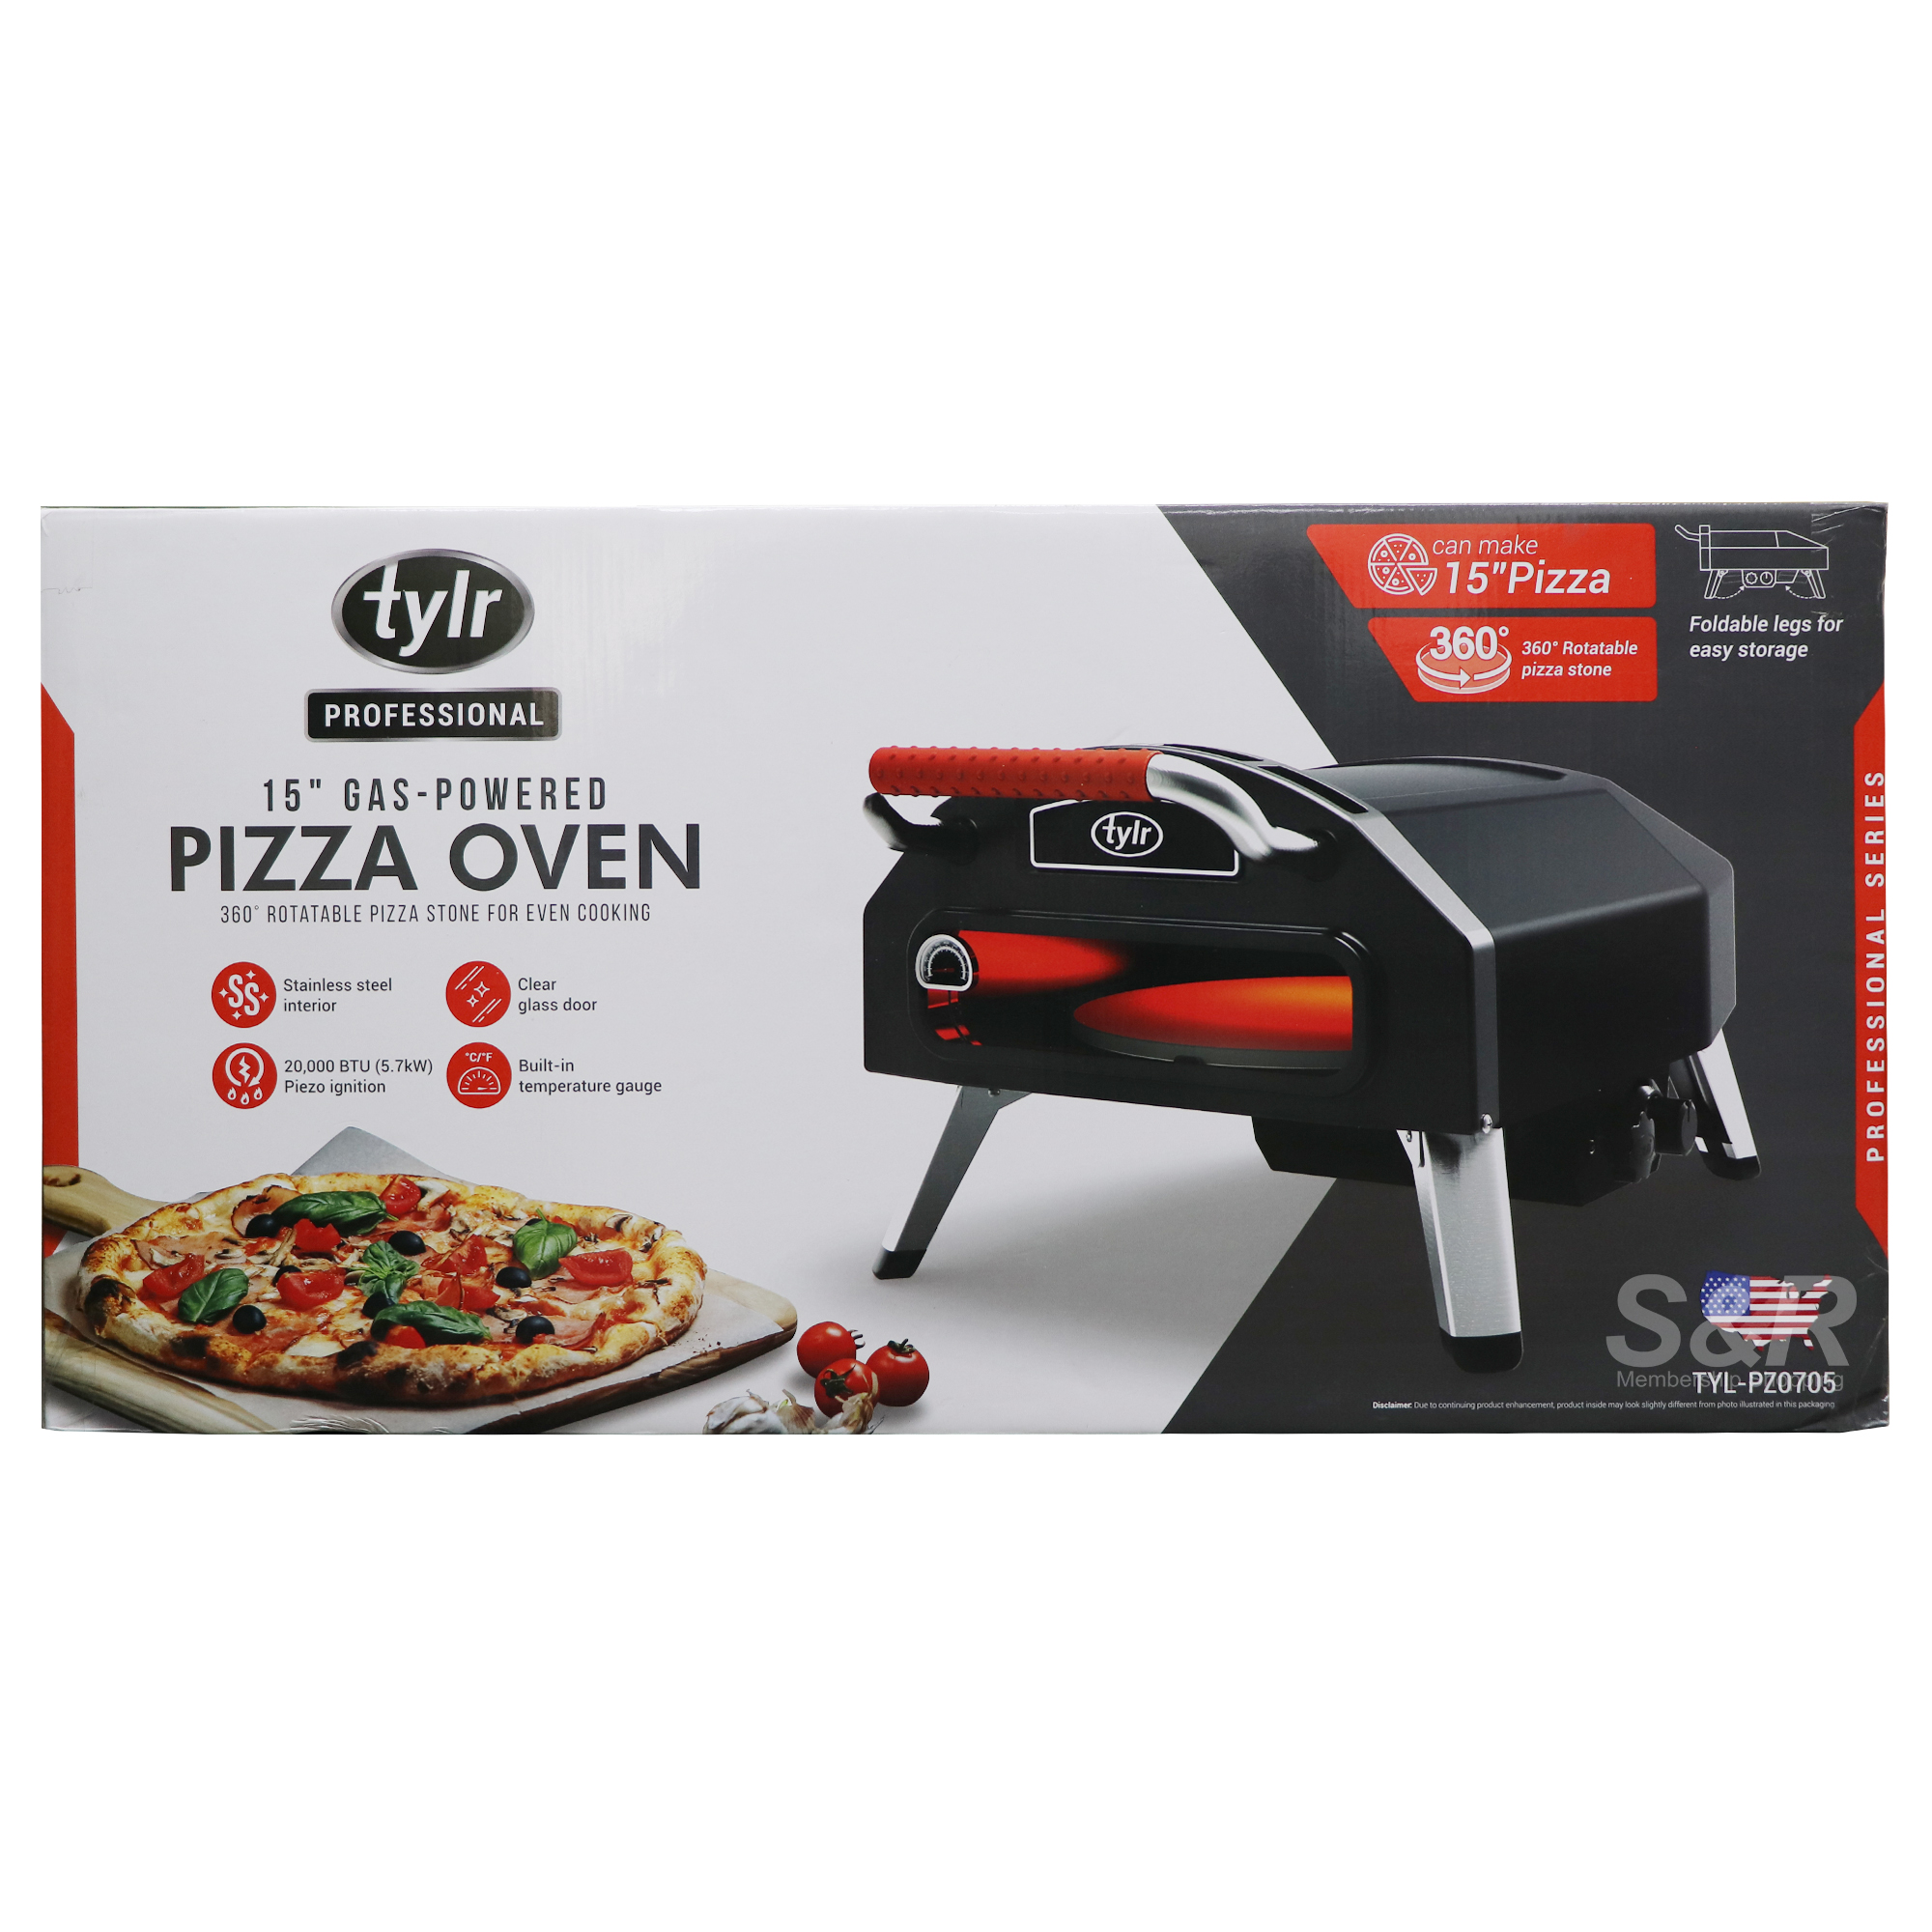 Tylr Professional 15in Gas-Powered Pizza Oven TYL-PZ07075